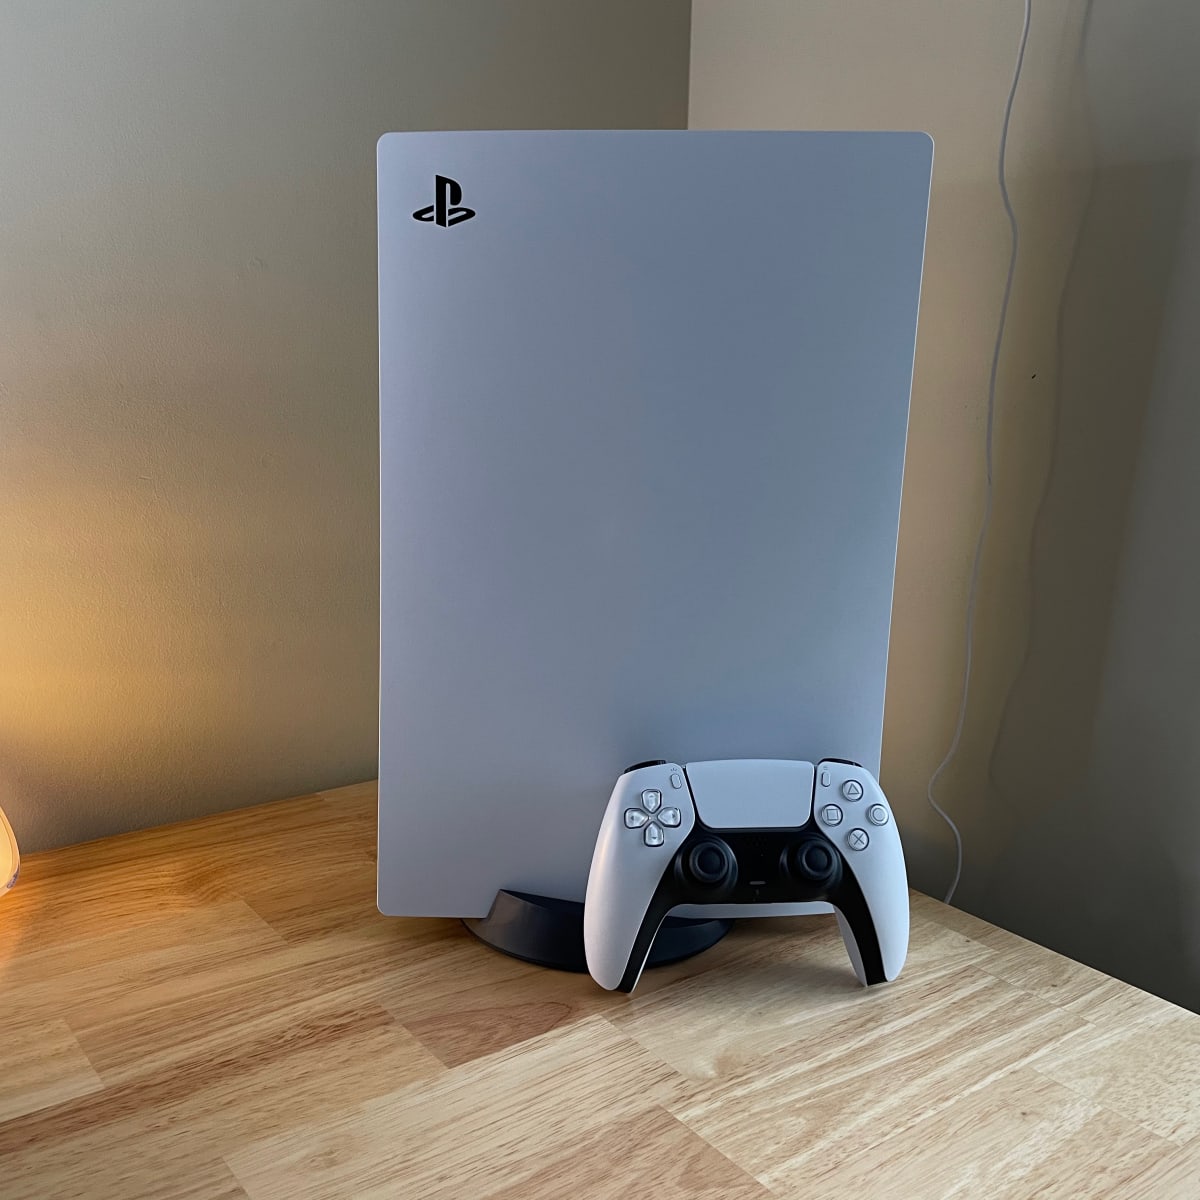 Forget PS5 restocks: Here's when you should buy this console